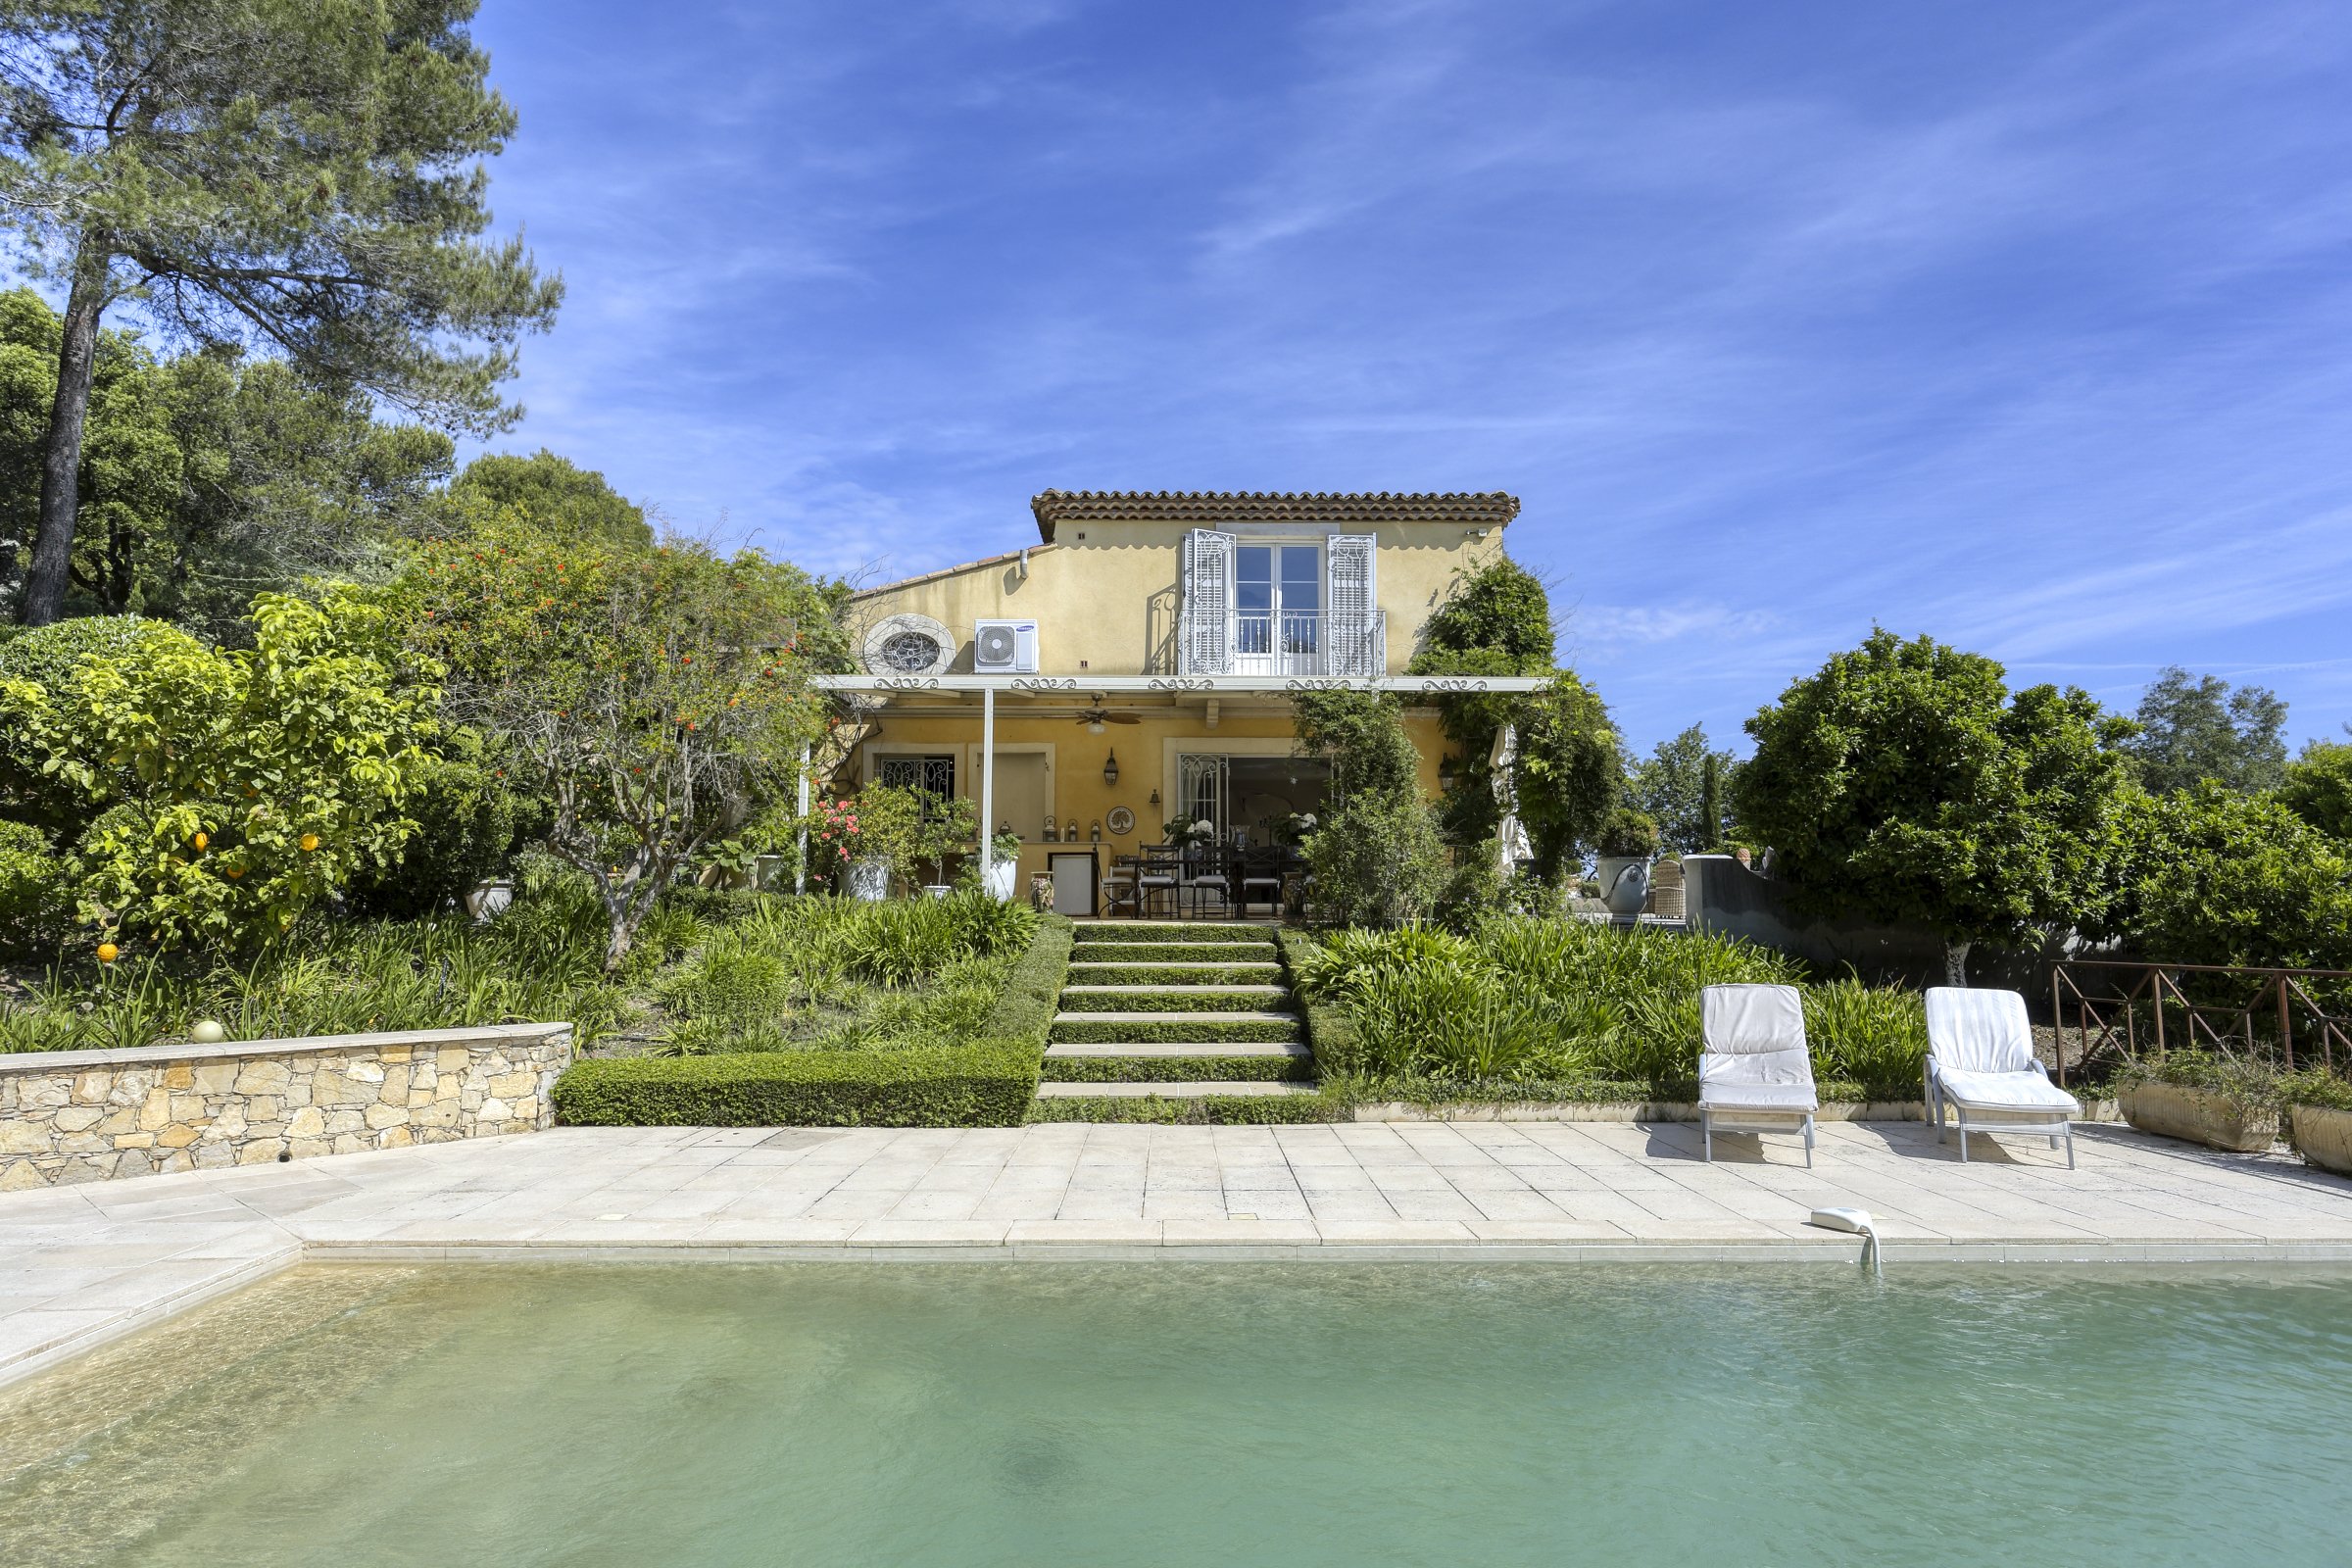 Francis York Provencal Villa in the Hills Above the Gulf of Saint-Tropez00003.jpeg